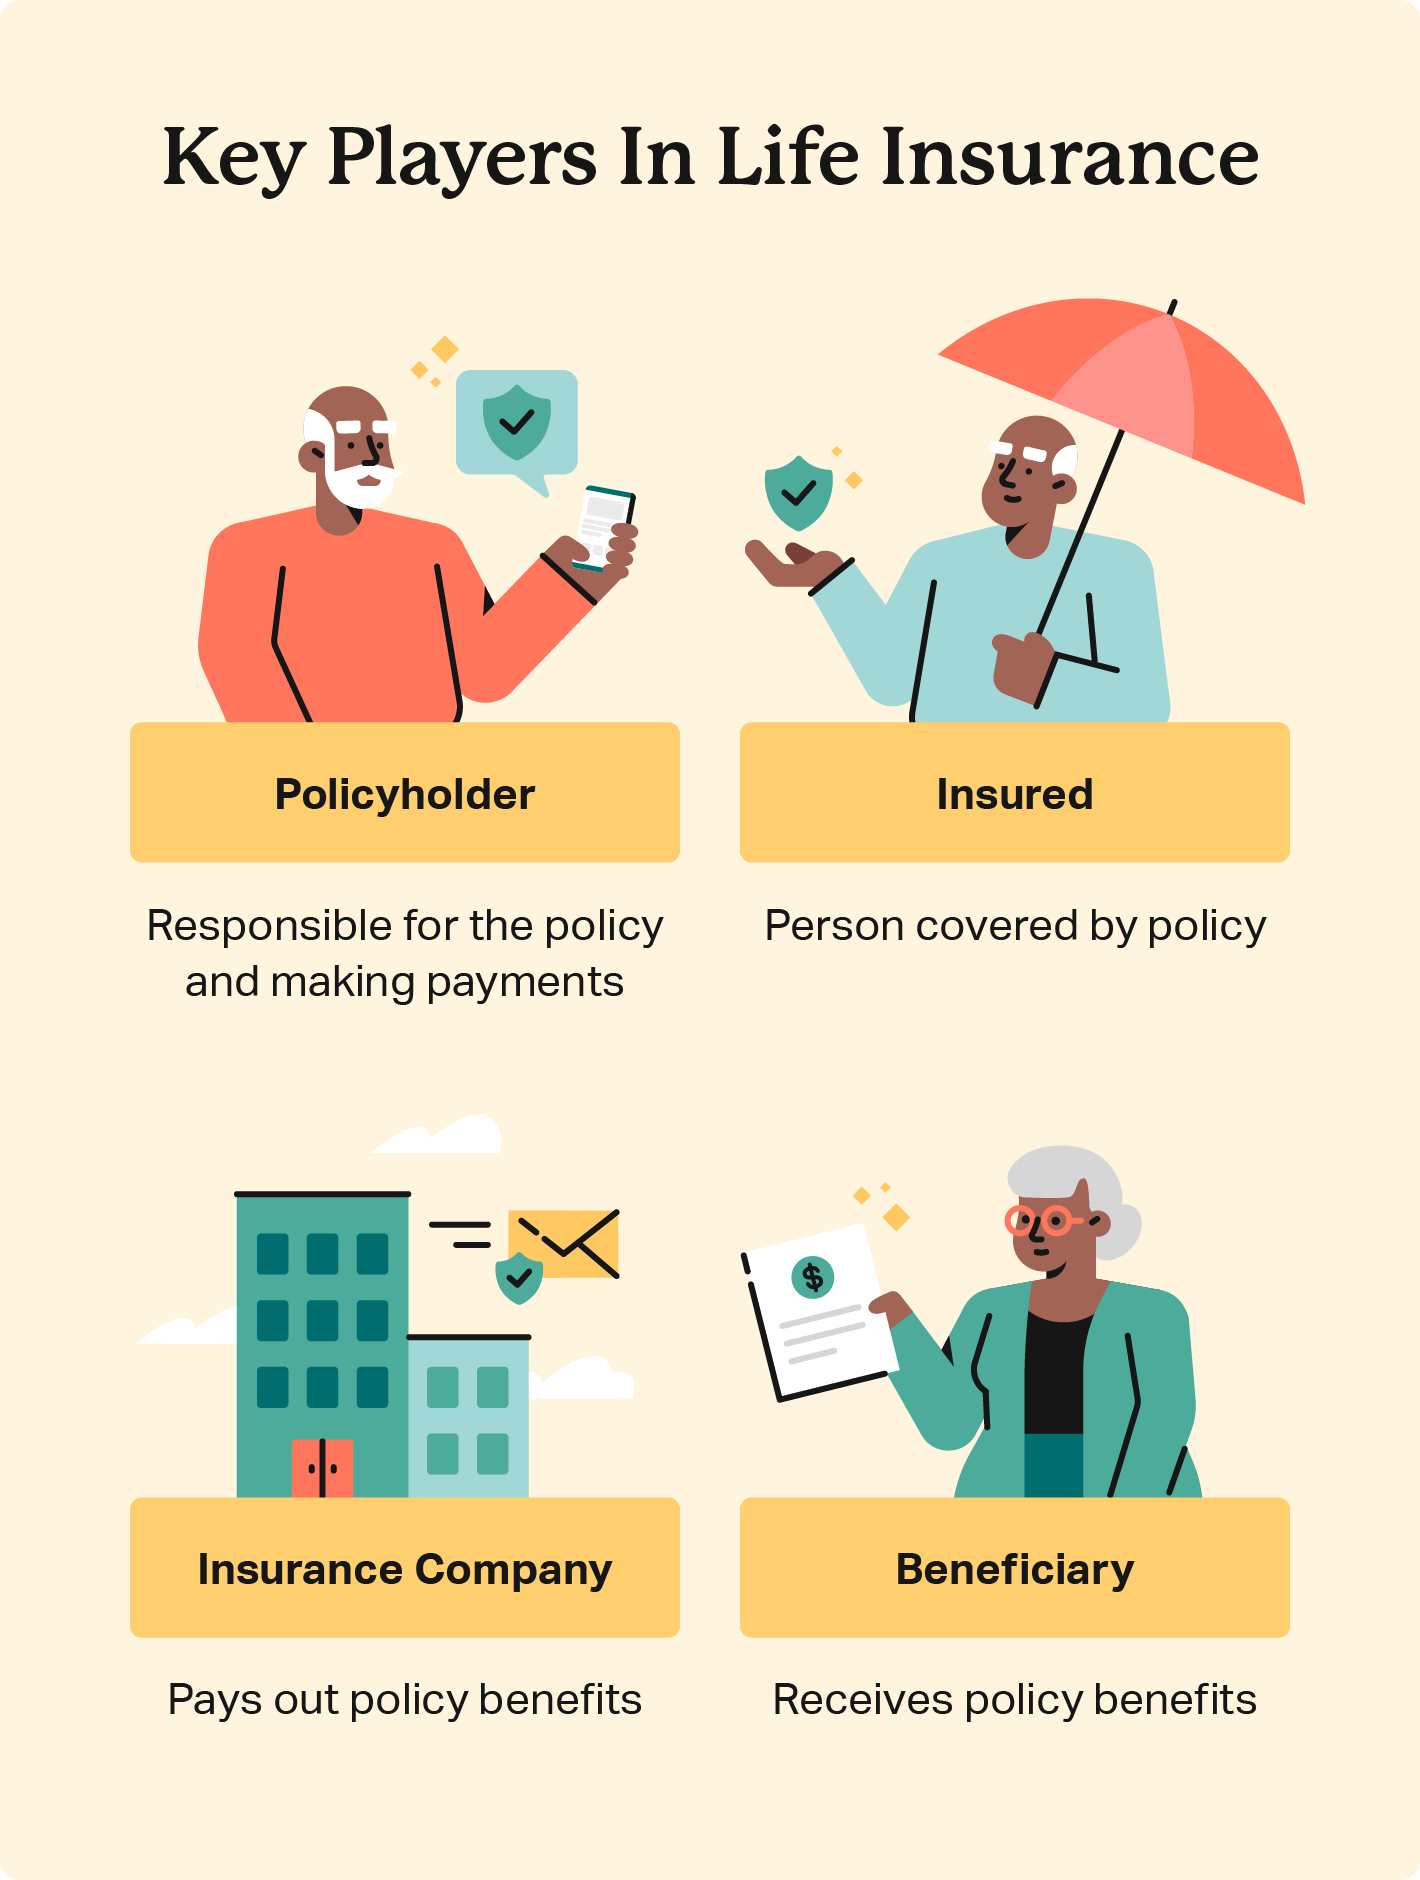 Images names key players in insurance, including policyhodlers, the insured, insurance companies, and beneficiaries. 